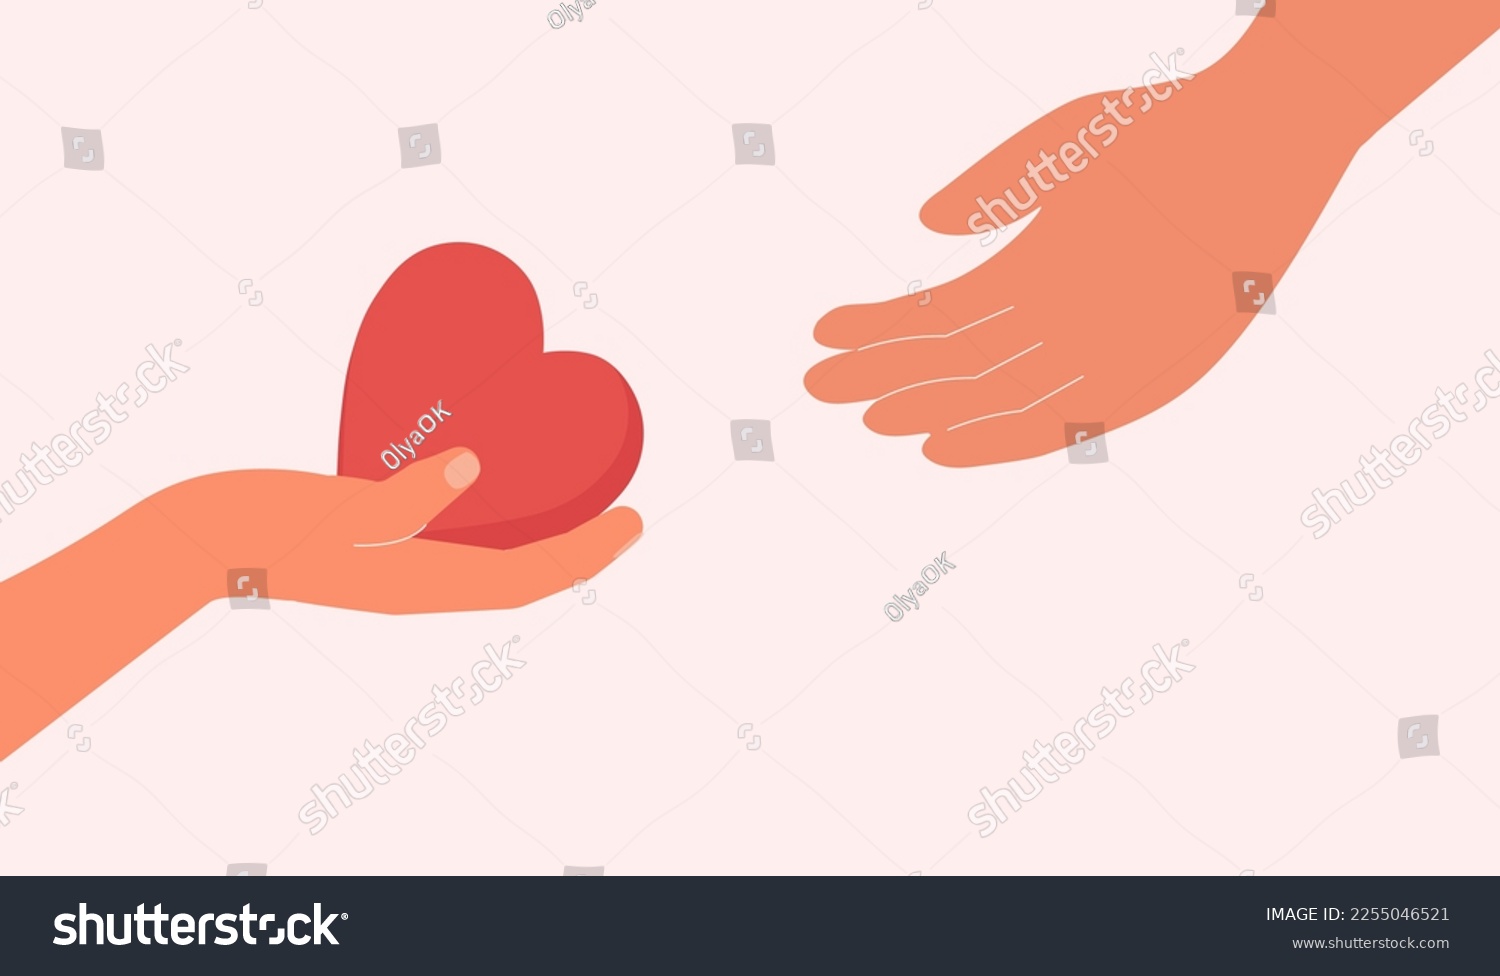 SVG of Hand holding heart and passing it from hand to hand. Volunteer or friend shares empathy and support for needy person vector illustration. Concept of psychological help, sharing love, donation, charity svg